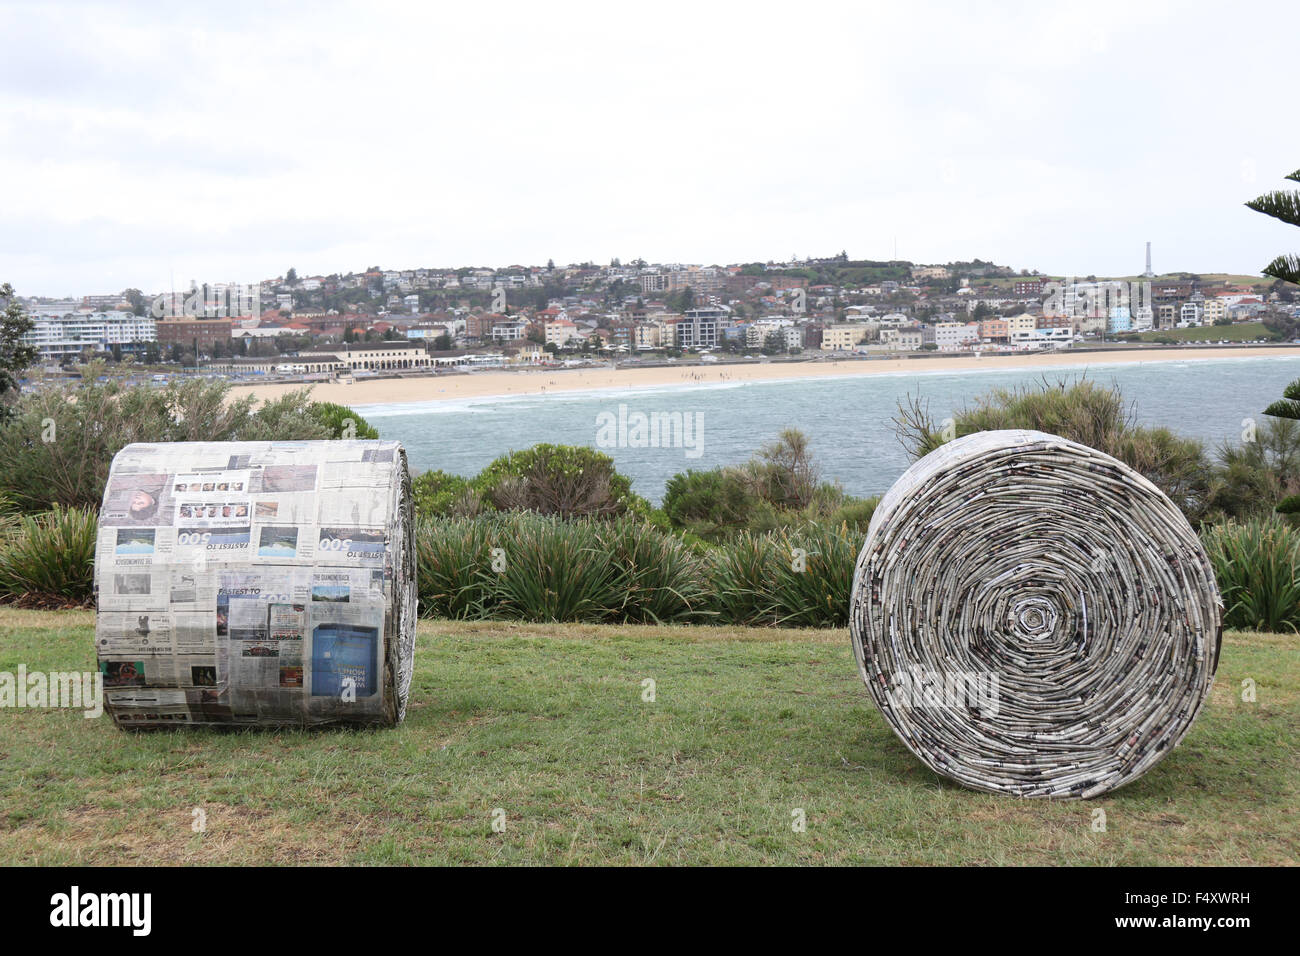 Sculpture no. 47, ‘Conspicuous Consumption’ by Benson Sculpture from USA at the 19th annual Sculpture by the Sea Bondi. 22 Octob Stock Photo